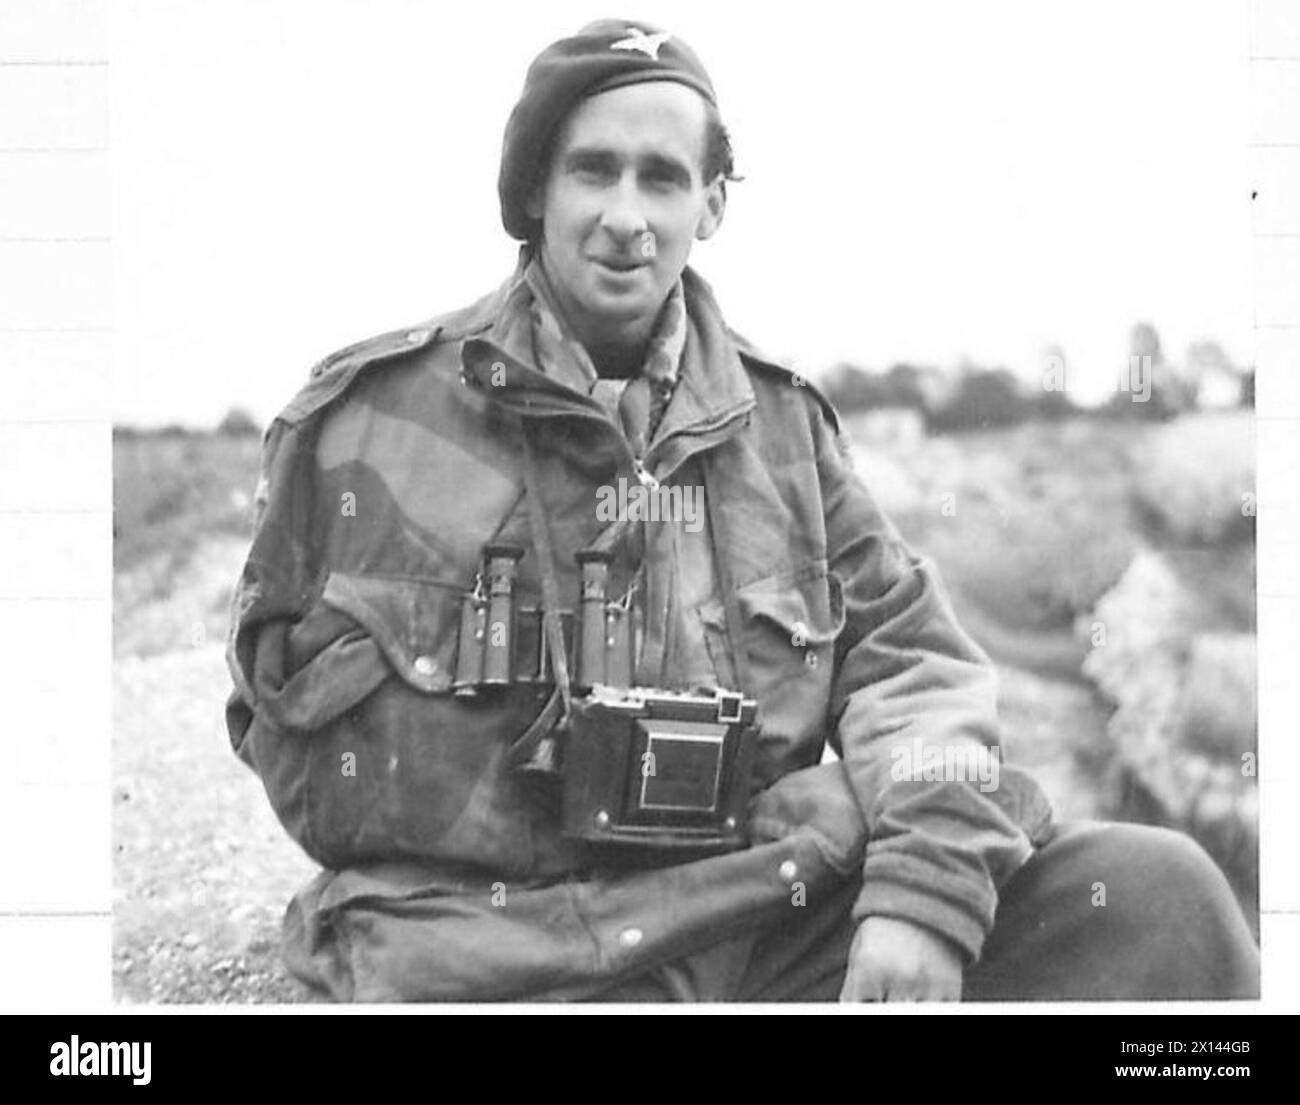 OPERATION 'MARKET GARDEN' - THE BATTLE FOR ARNHEM, SEPTEMBER 1944 - Portrait of Sgt D M Smith, one of the three Army Film and Photographic Unit Photographers who took the graphic still and cine pictures of the 1st Airborne Division epic fight at Arnhem, taken at the AFPU Centre at Pinewood on the day that they arrived back. Smith was wounded in the shoulder but is still carrying his camera Stock Photo